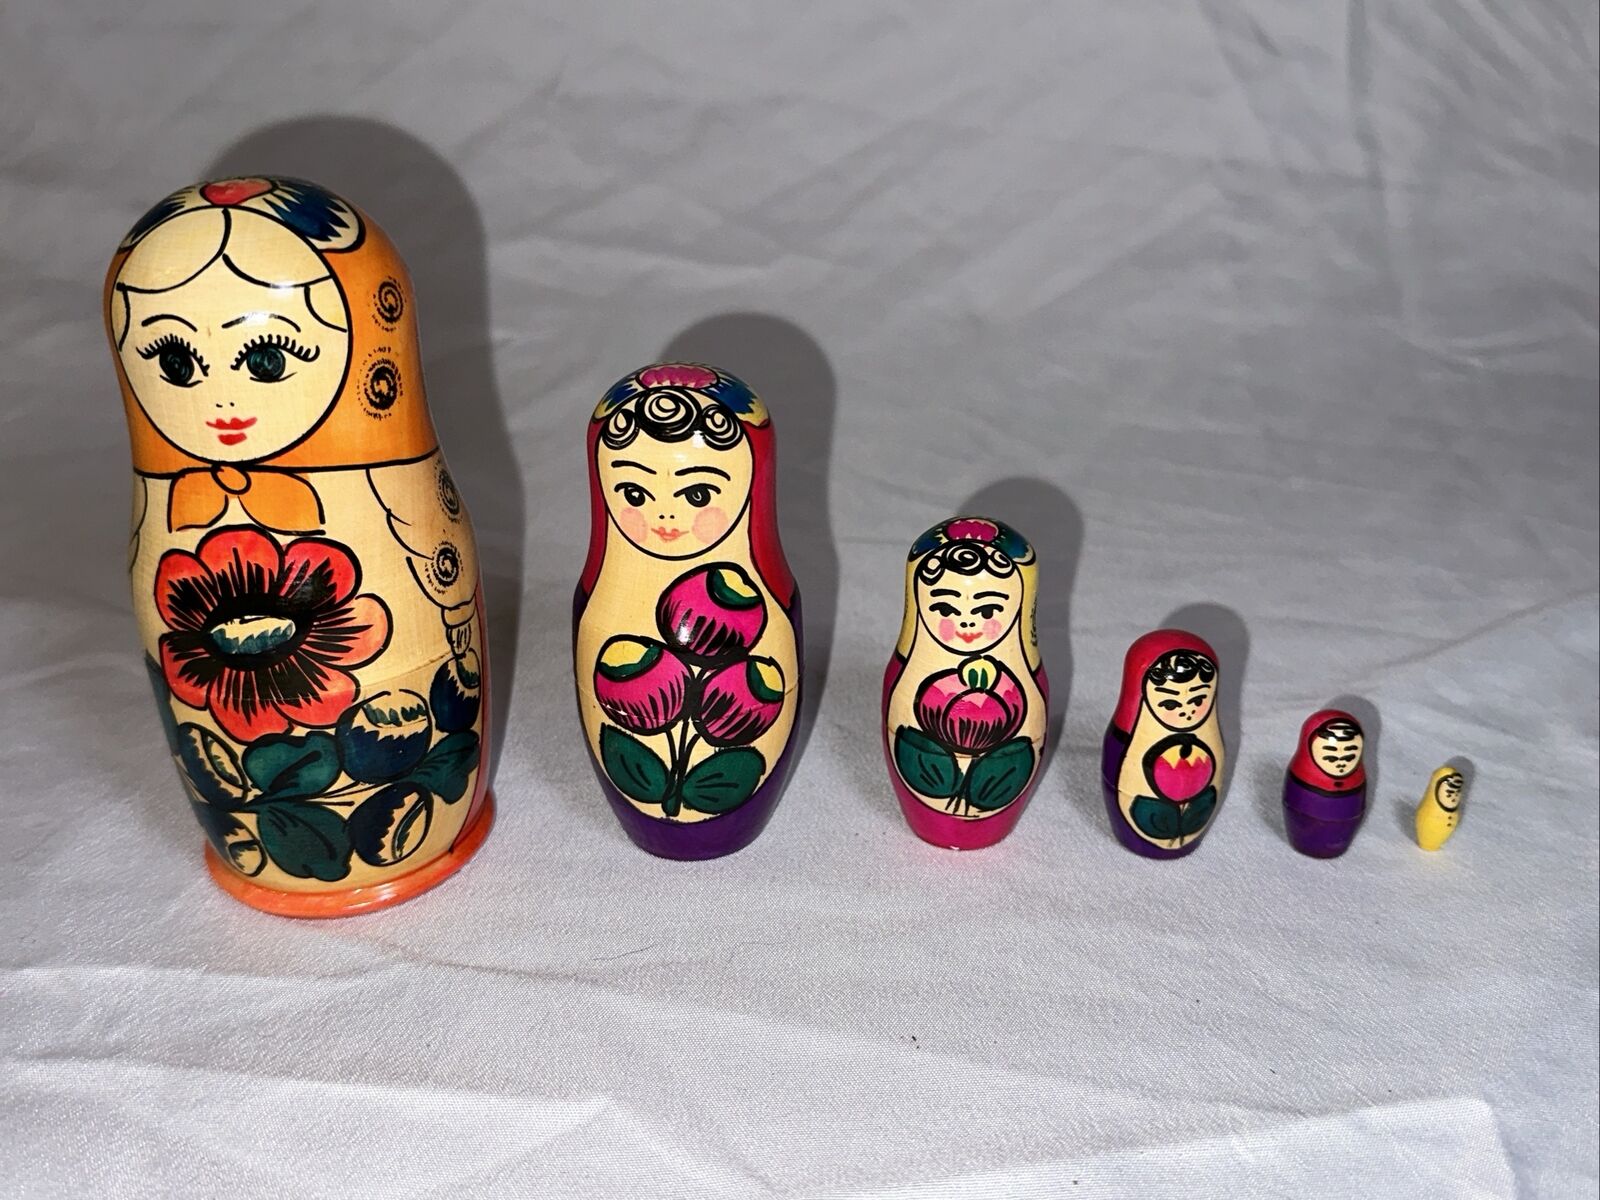 Russian Wood Hand Painted Nesting Dolls 6 Piece Set Vintage